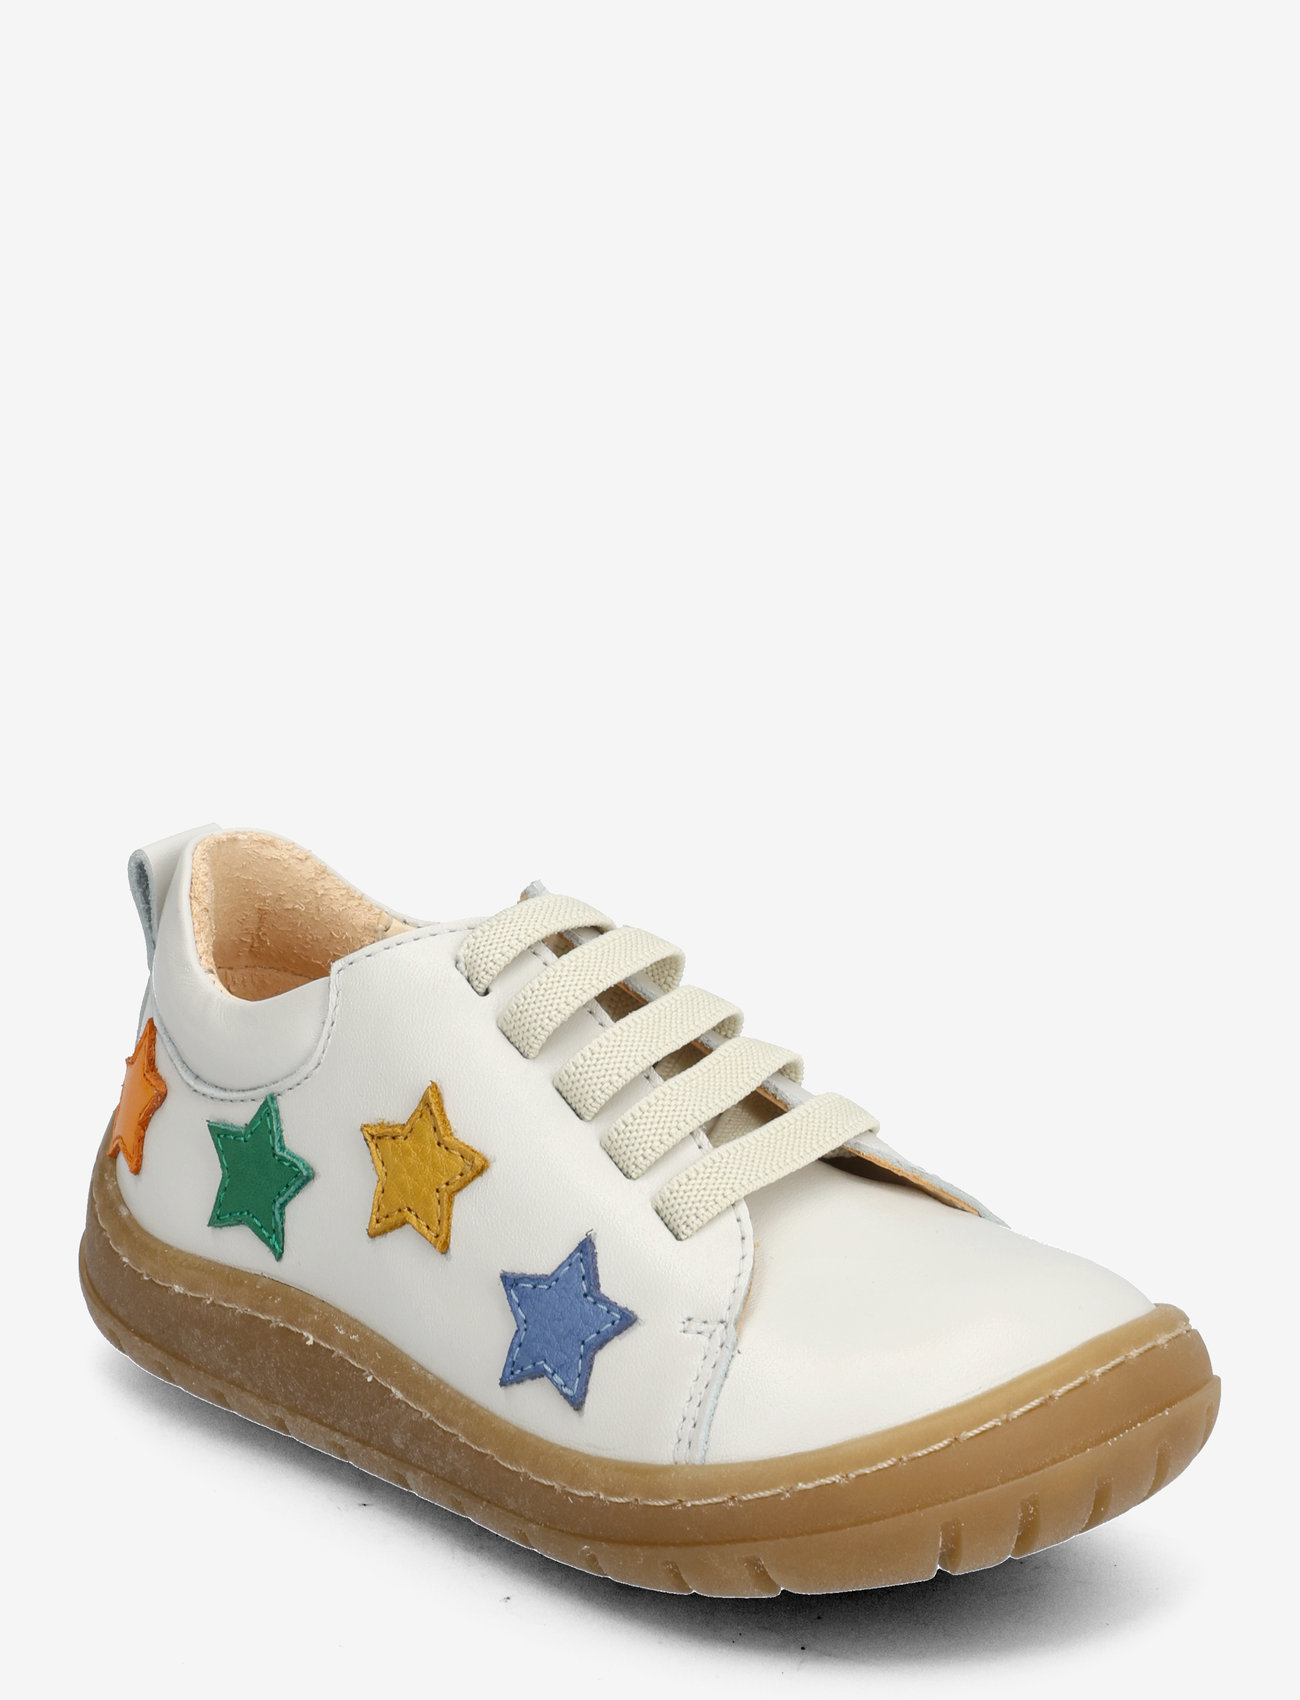 ANGULUS - Shoes - flat - with lace - sommarfynd - 1493/a006 off white/stars - 0